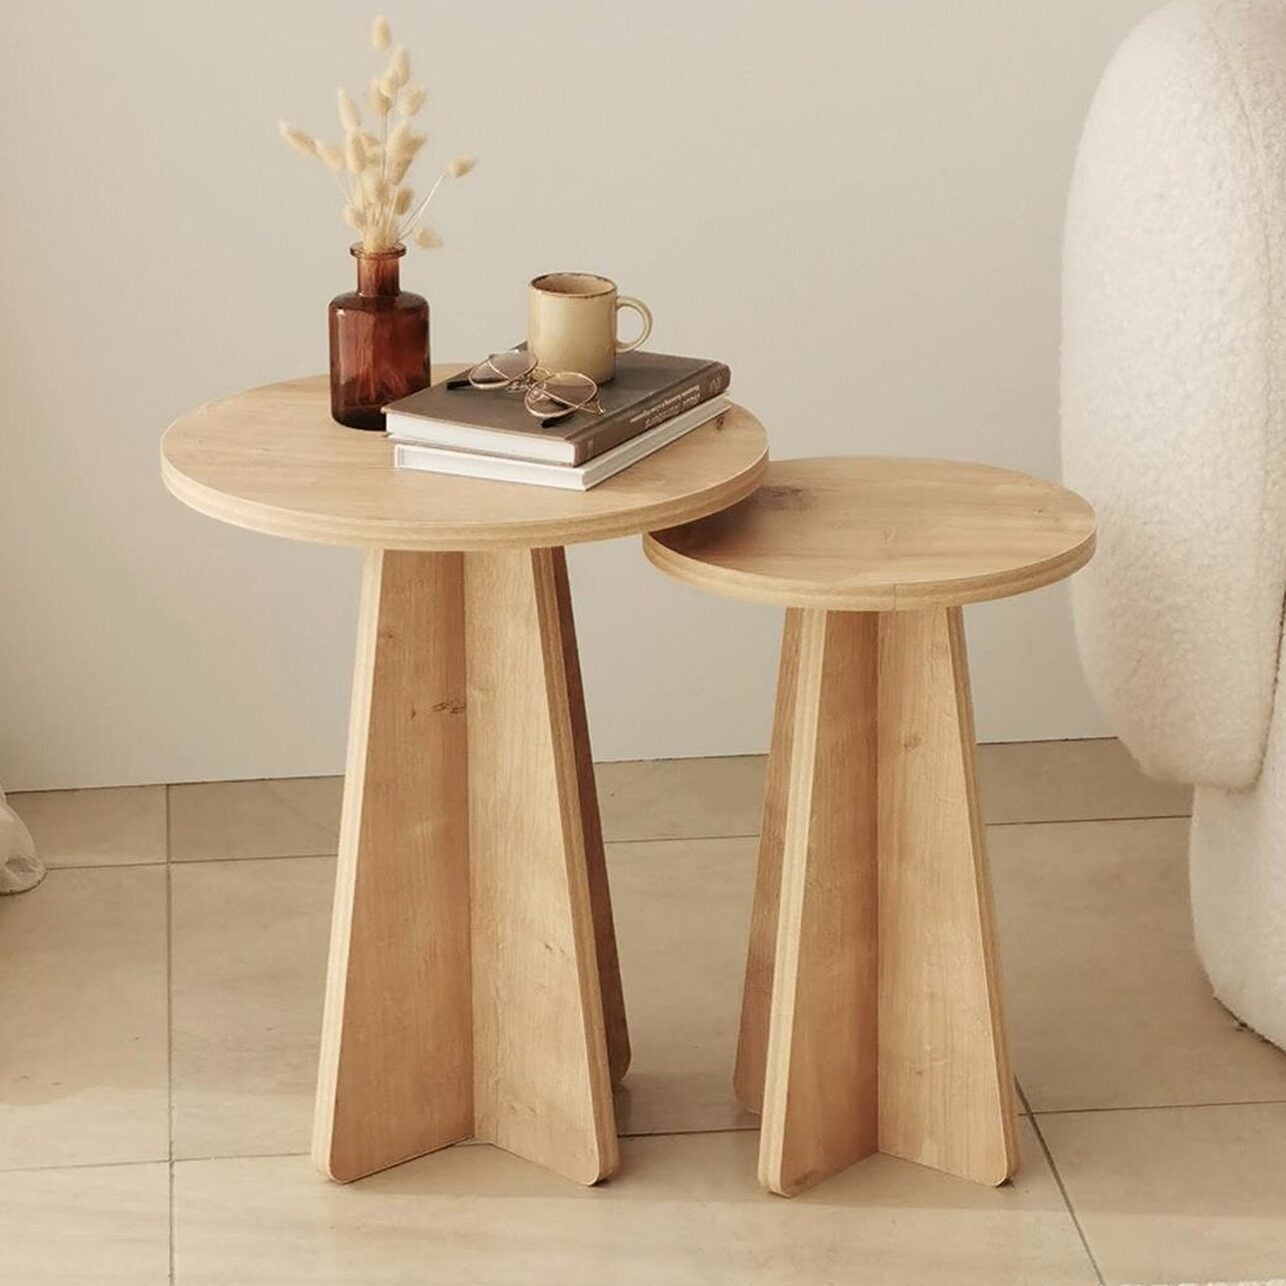 It Wasn’t Easy, But We Found 18 Nesting Tables That Save Space and Look Good While Doing It